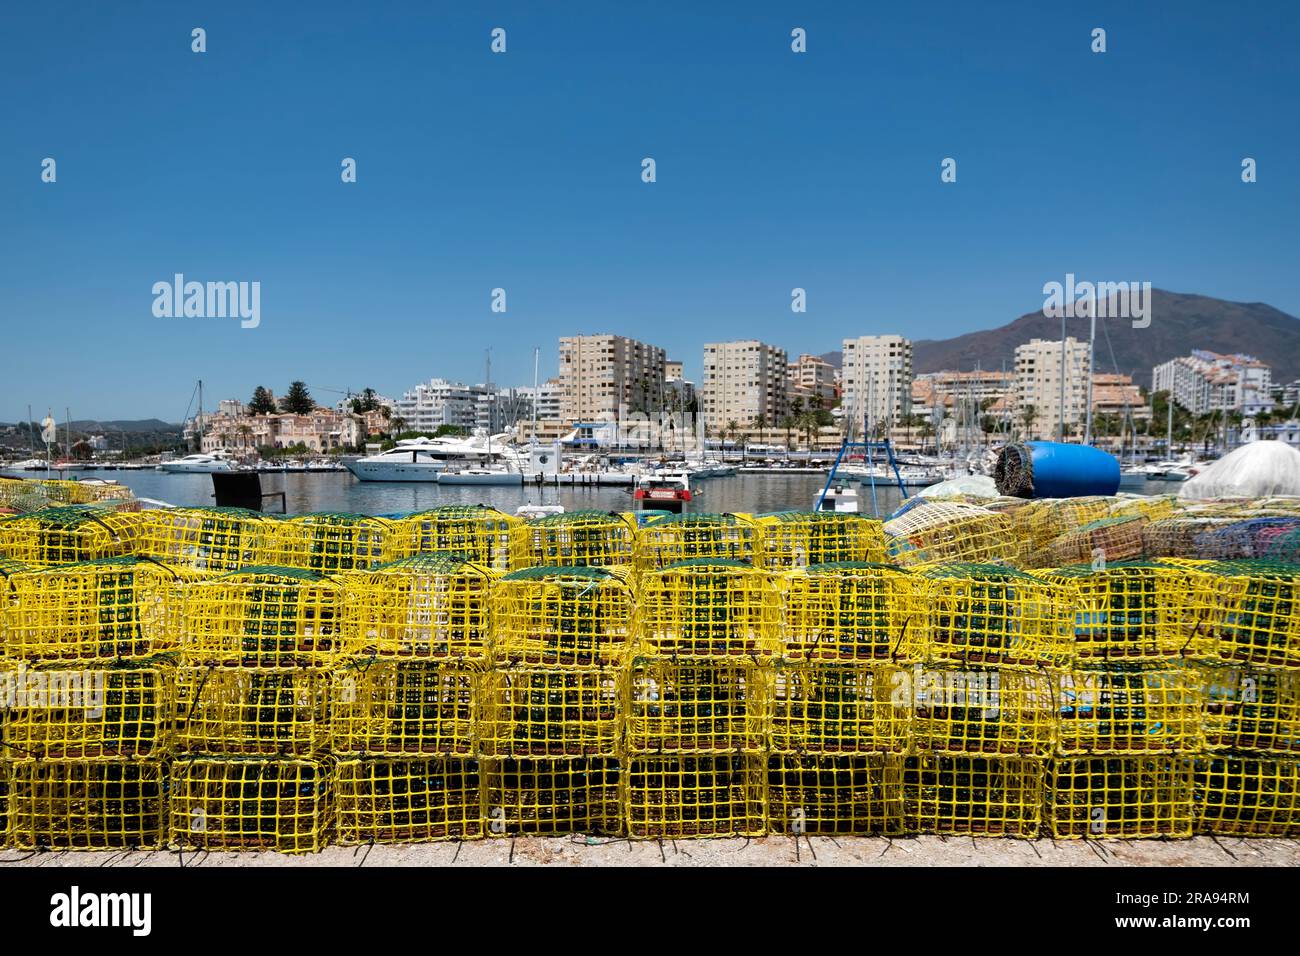 Stacked up colourful lobster pots or crab boxes line the side of the old port, Estepona Spain with the new town marina shown in the background Stock Photo